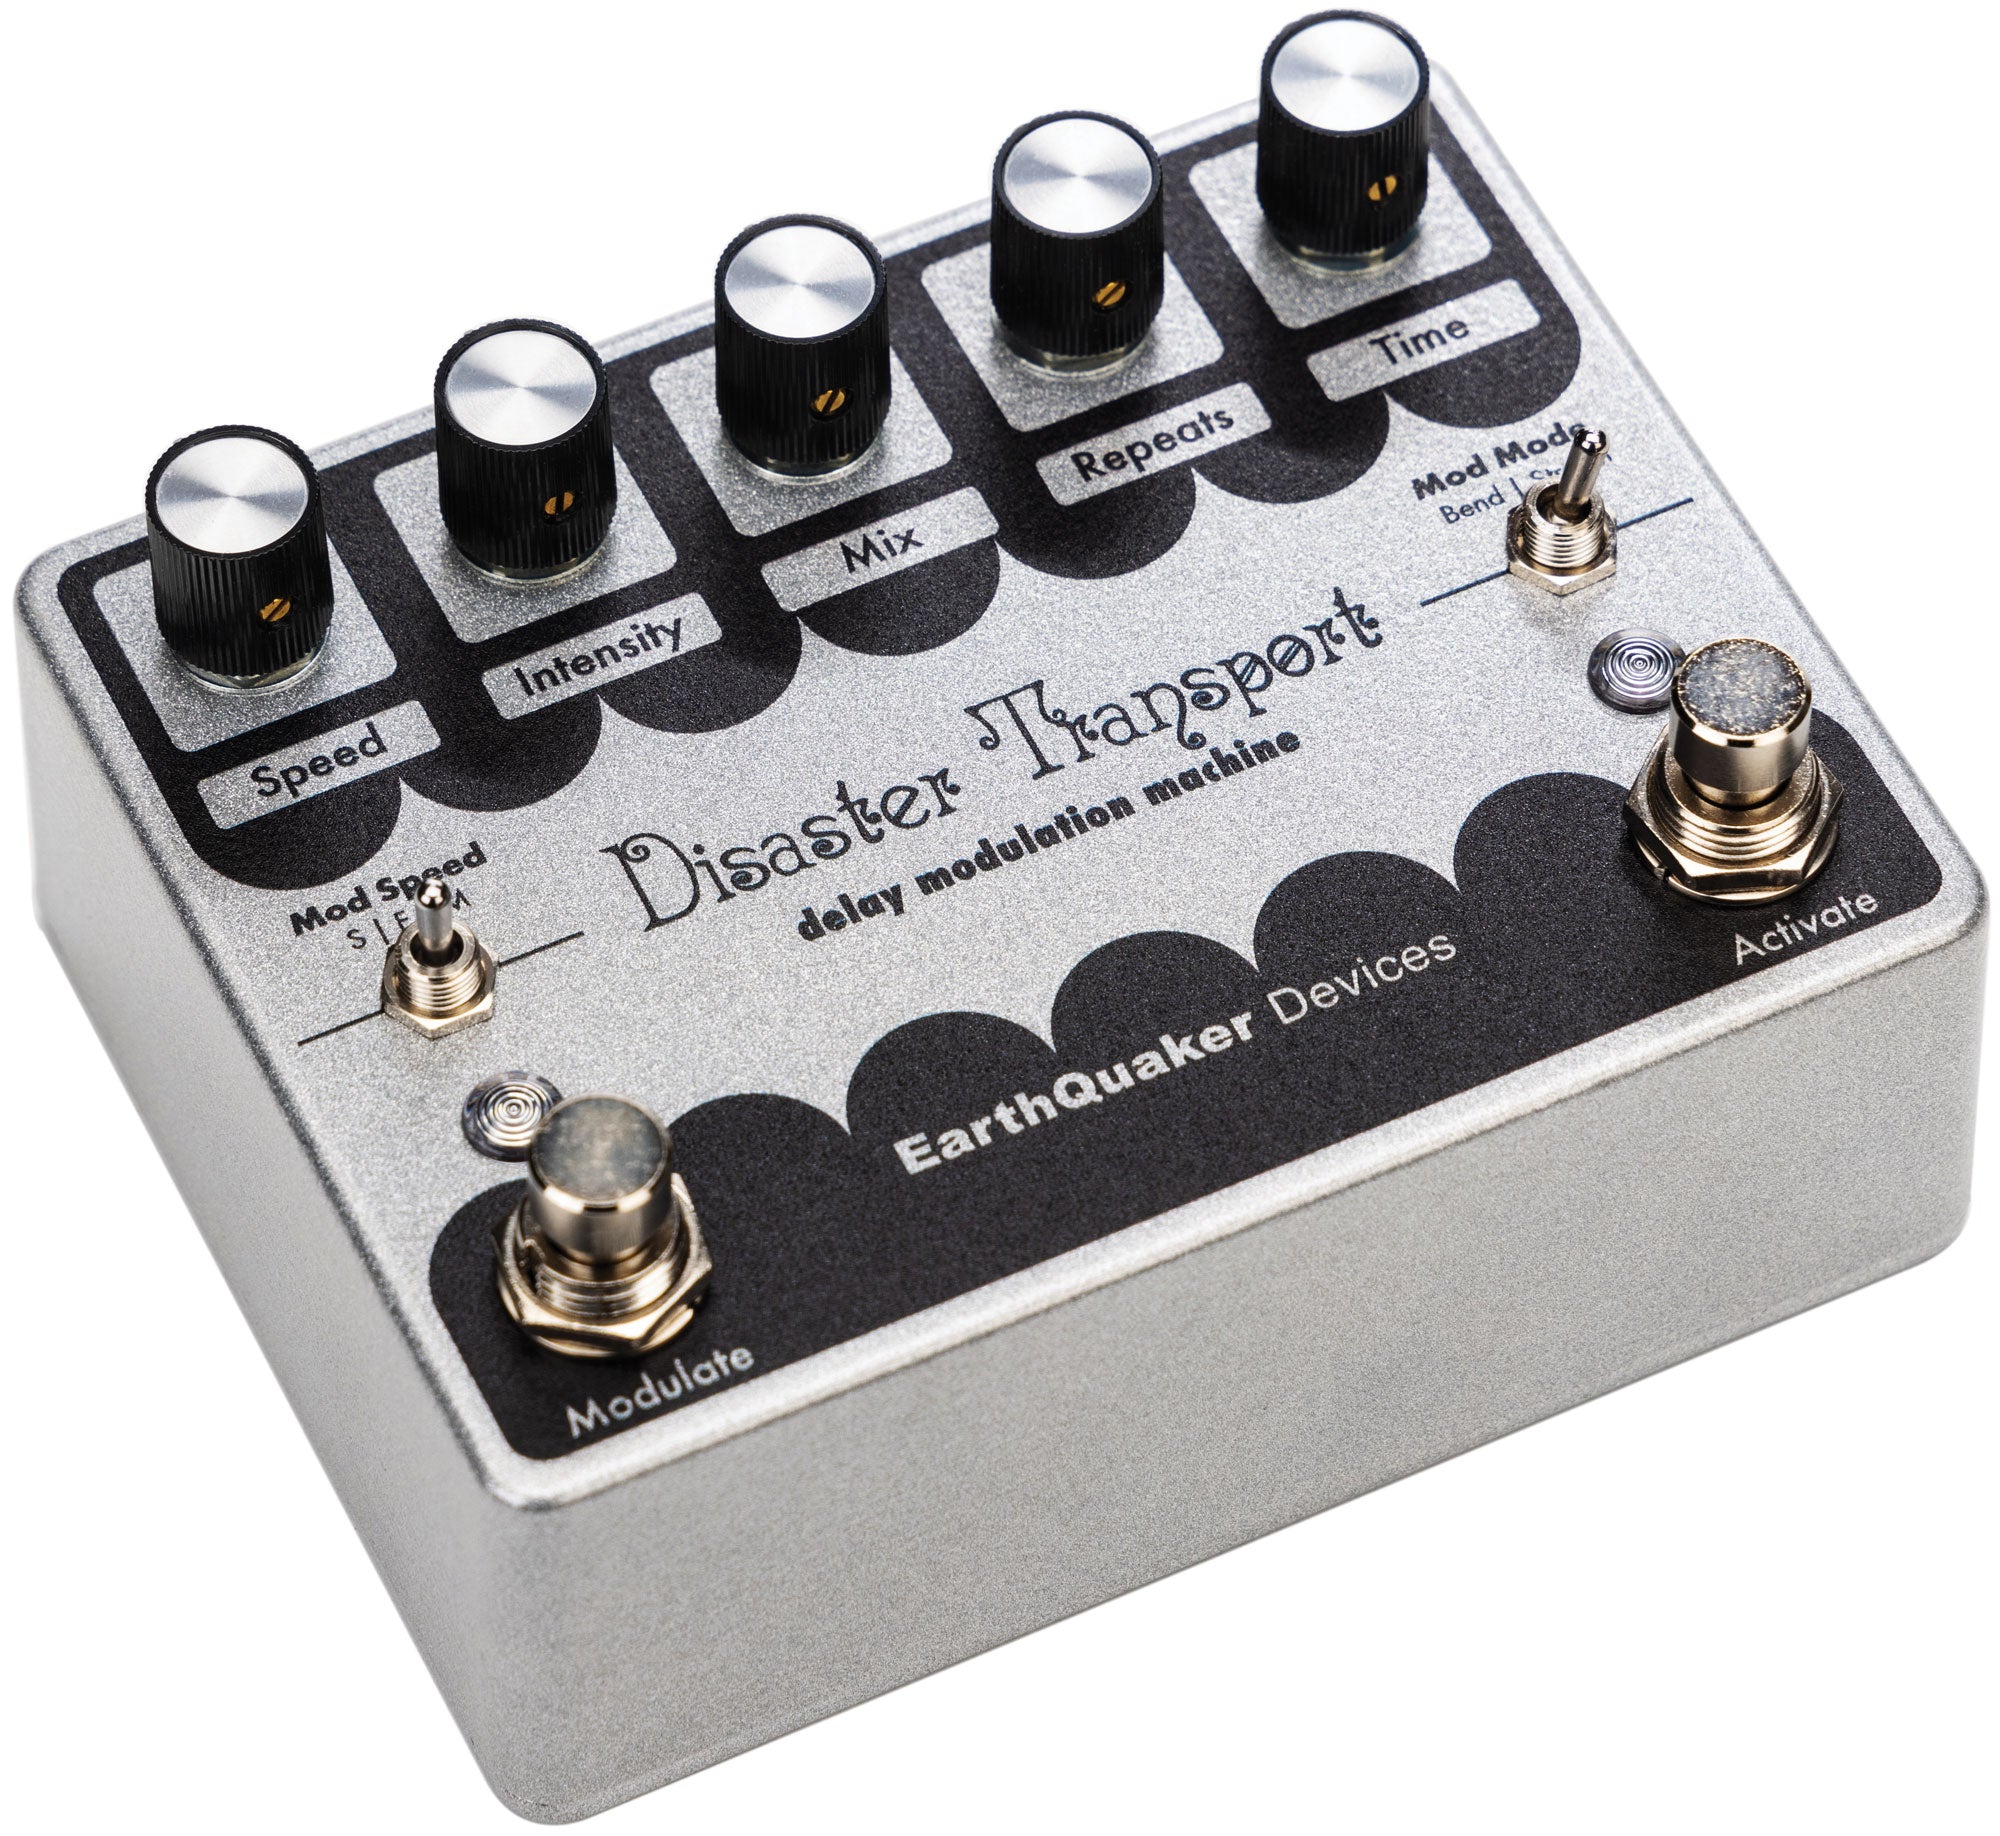 Disaster Transport Delay Modulation Machine Limited Legacy Reissue